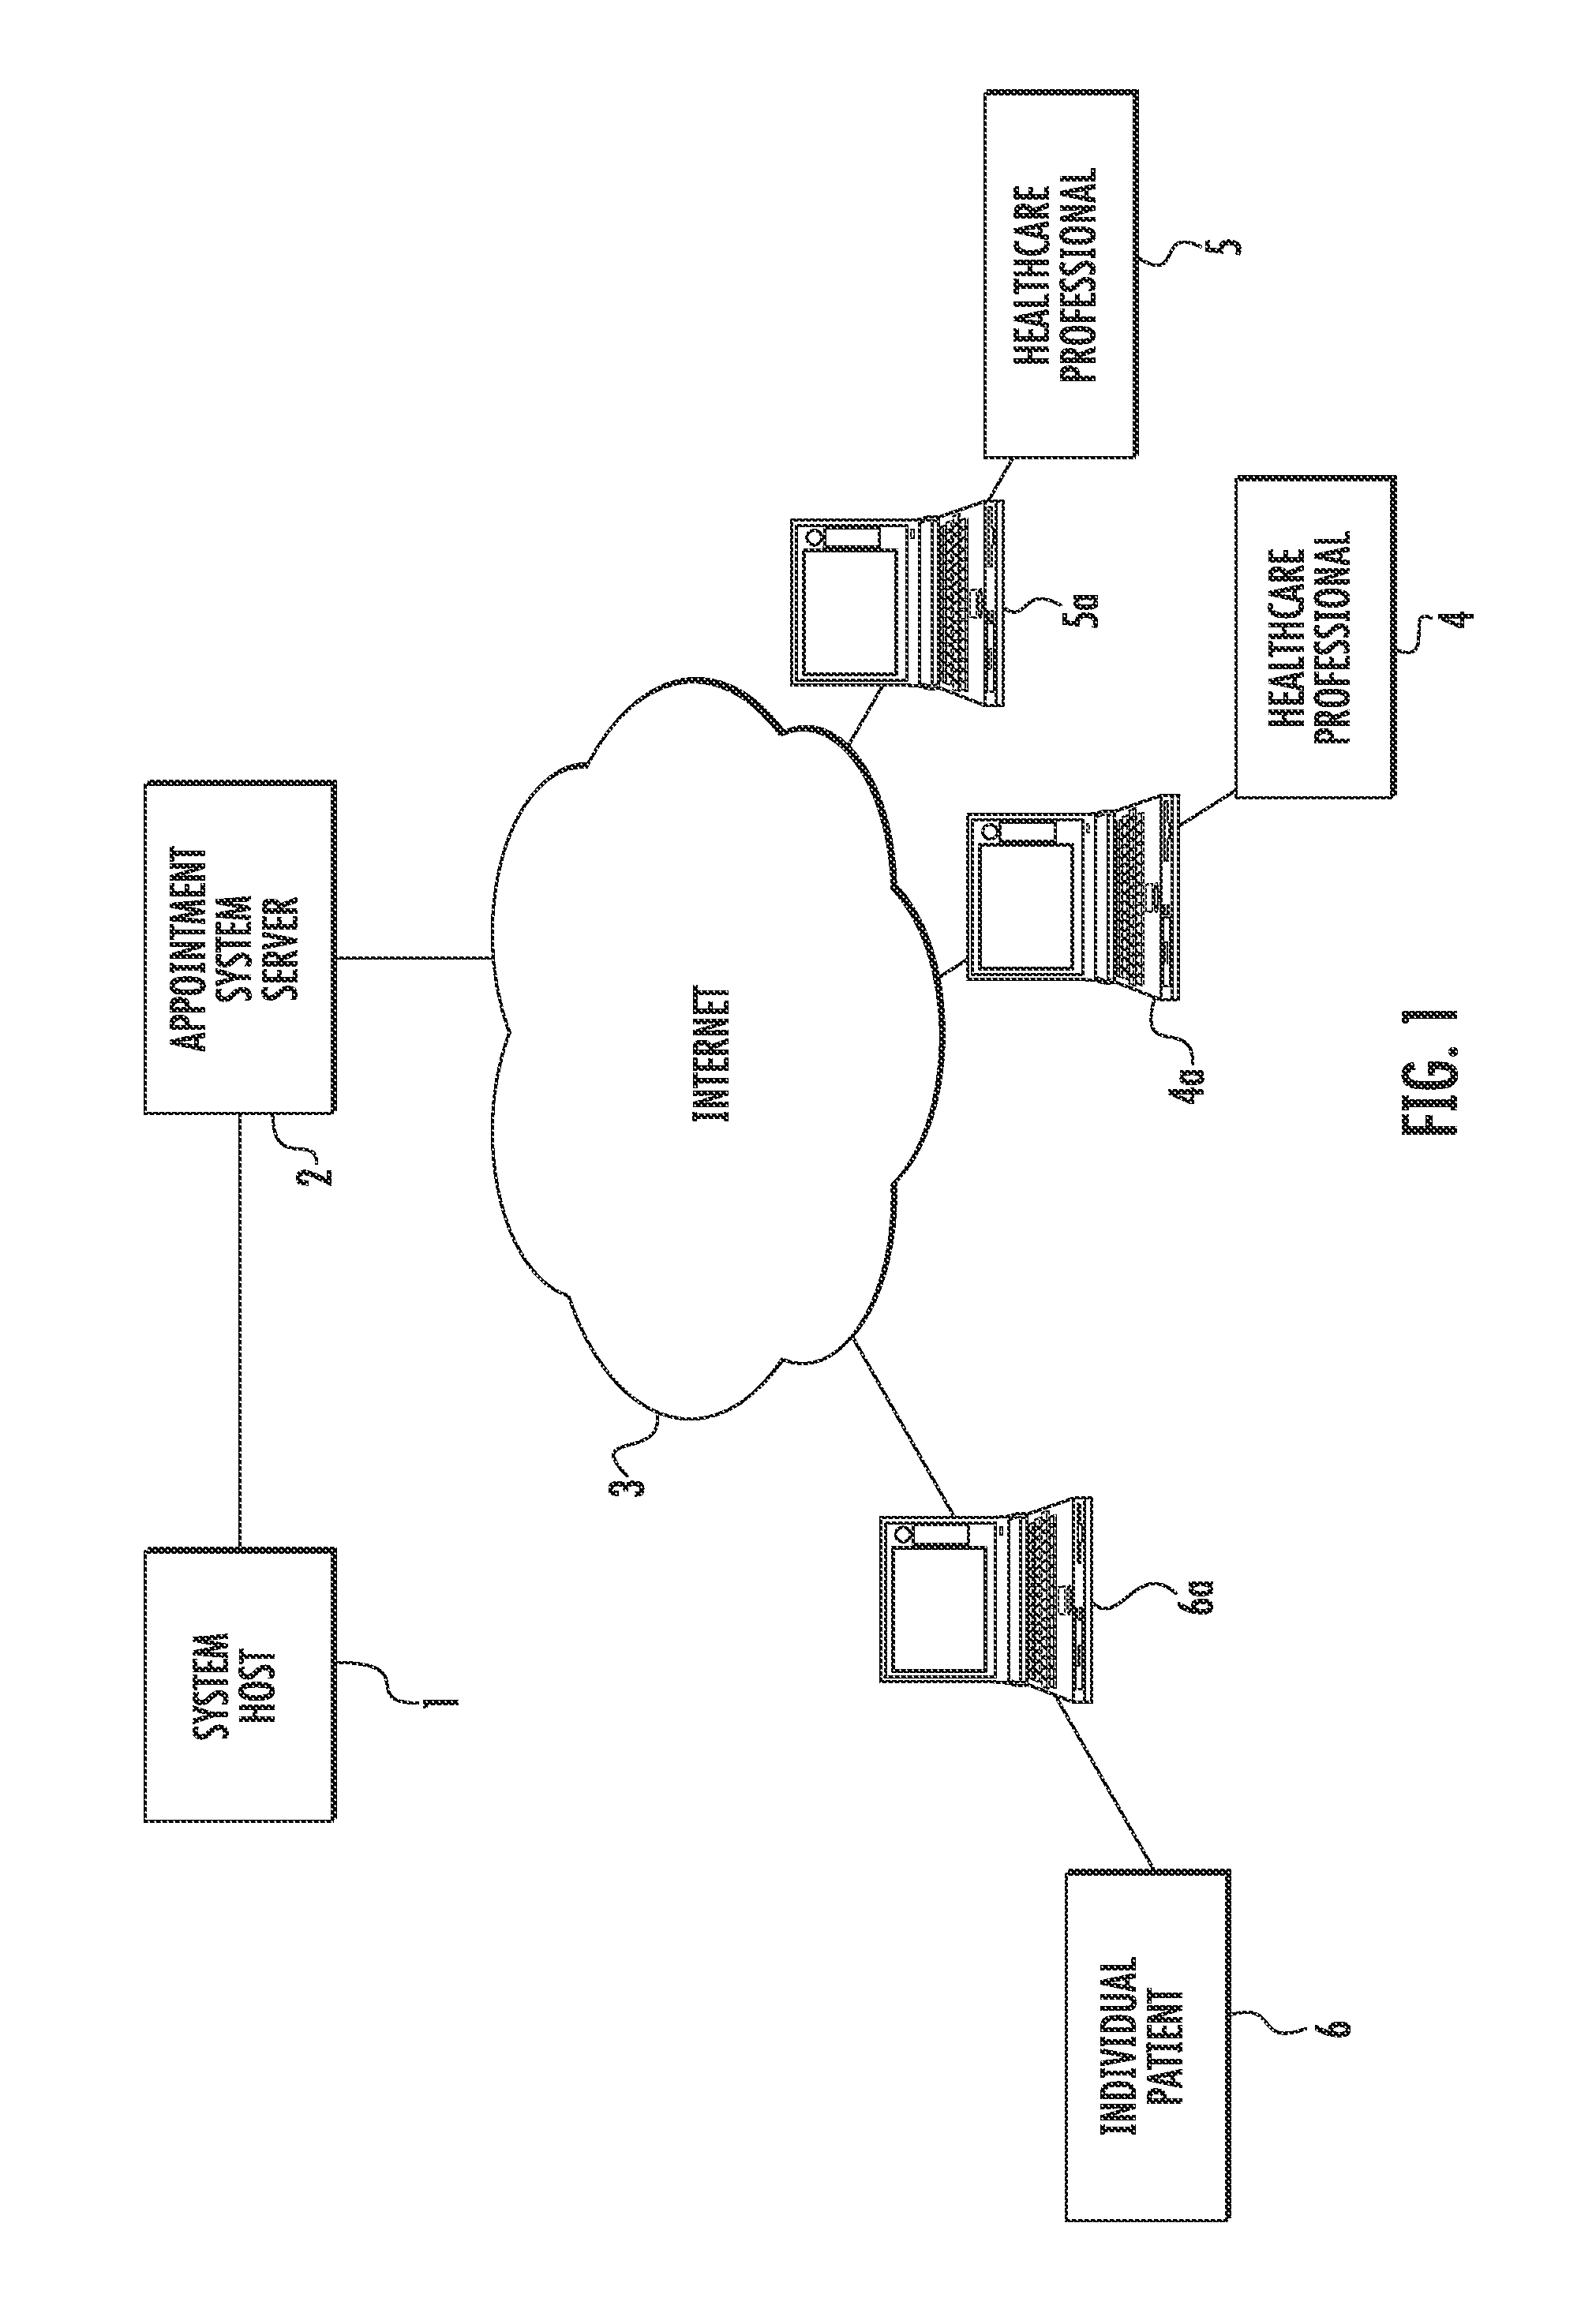 Medical professional appointment scheduling and payment system and method